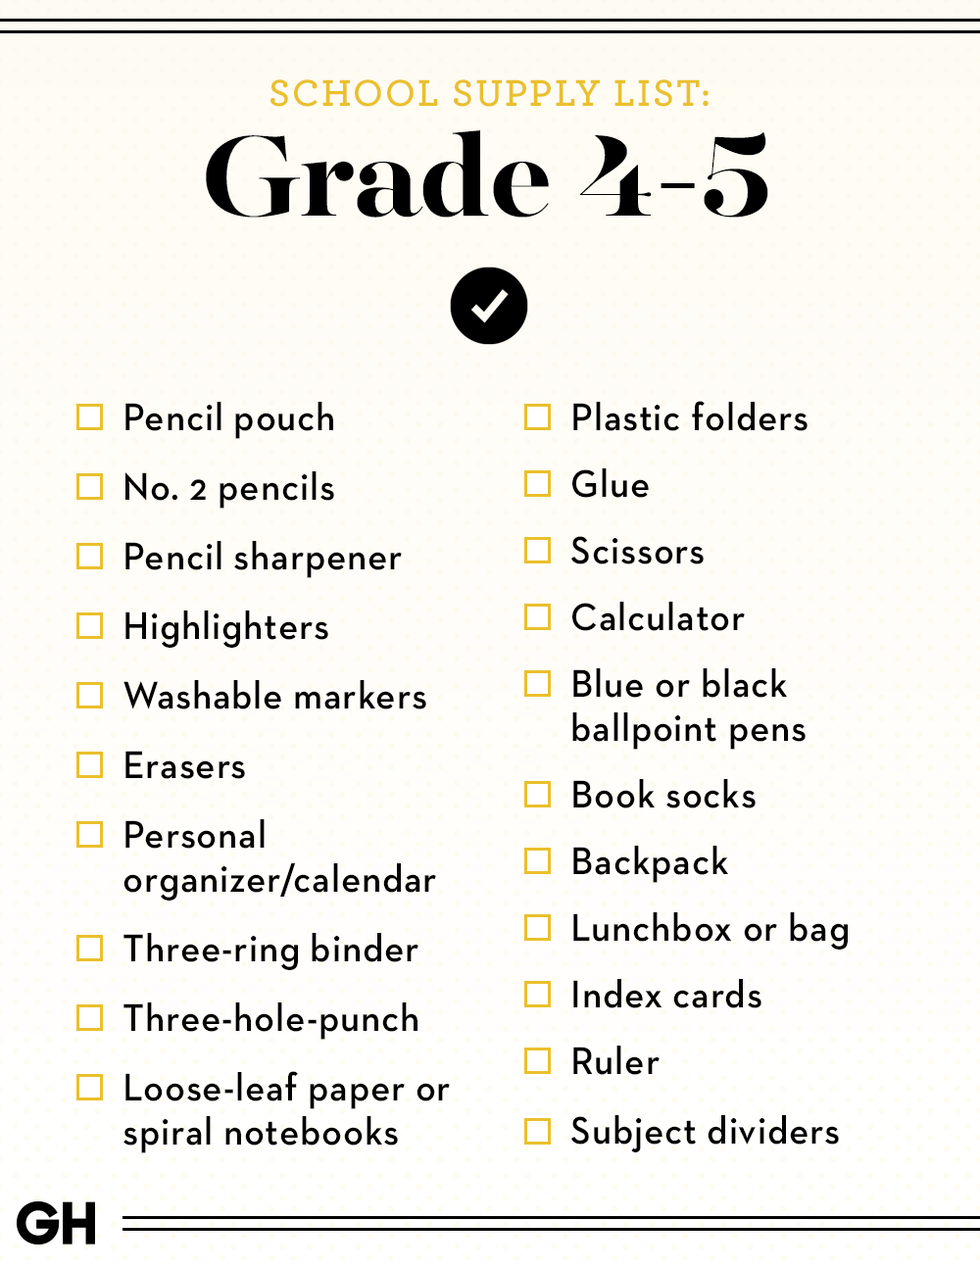 Back to school: Top school supplies for every grade